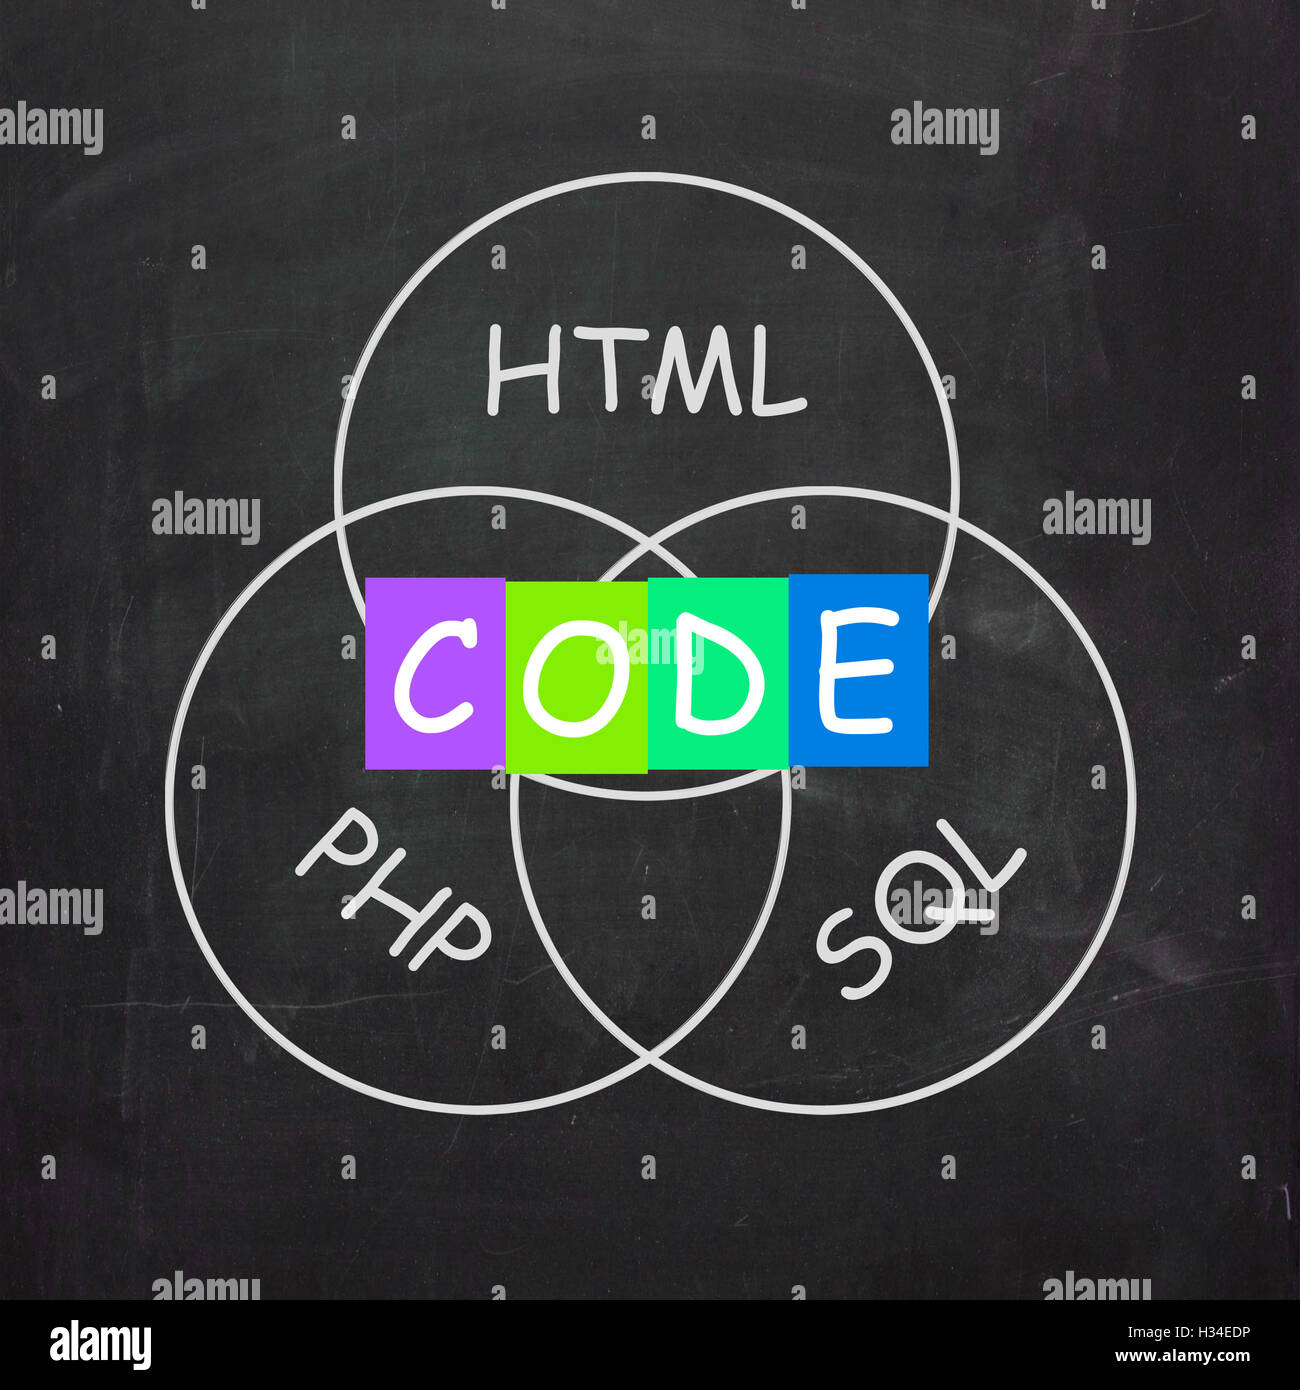 Words Refer to Code HTML PHP and SQL Stock Photo